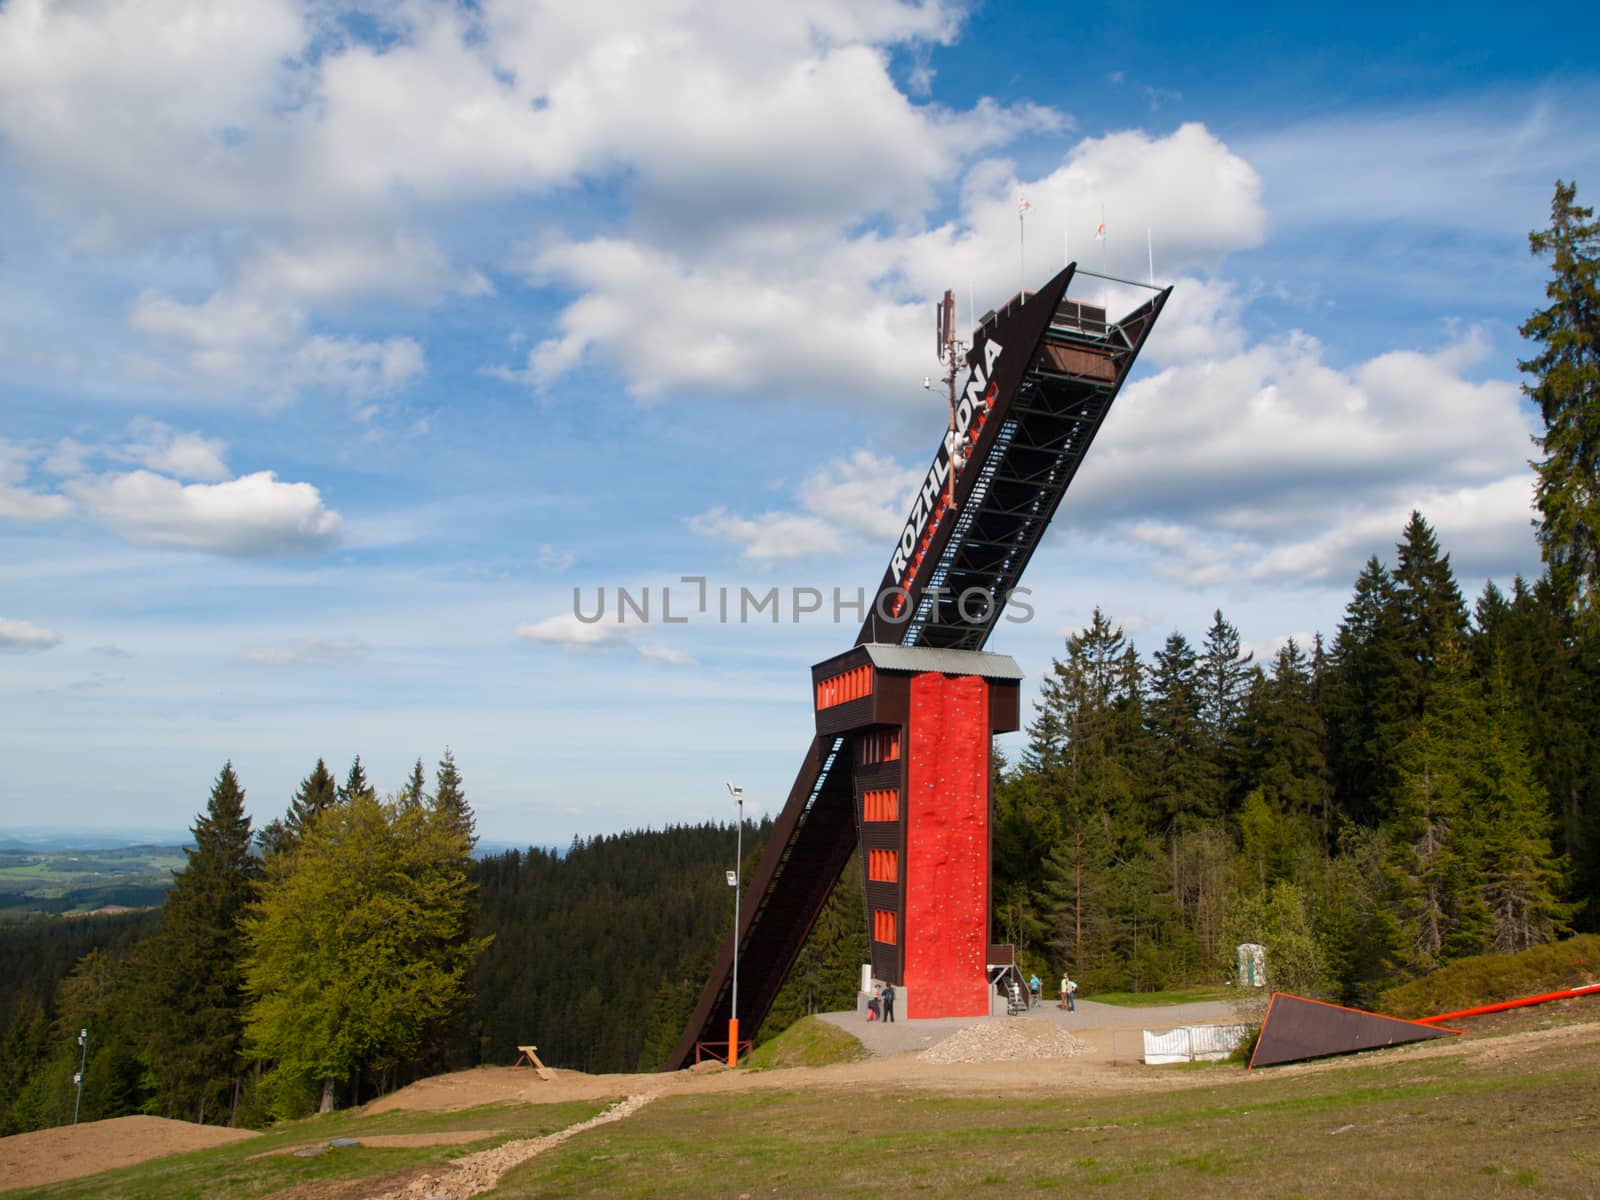 Zadov lookout tower - former ski jump in Sumava Mountains, Czech Republic.